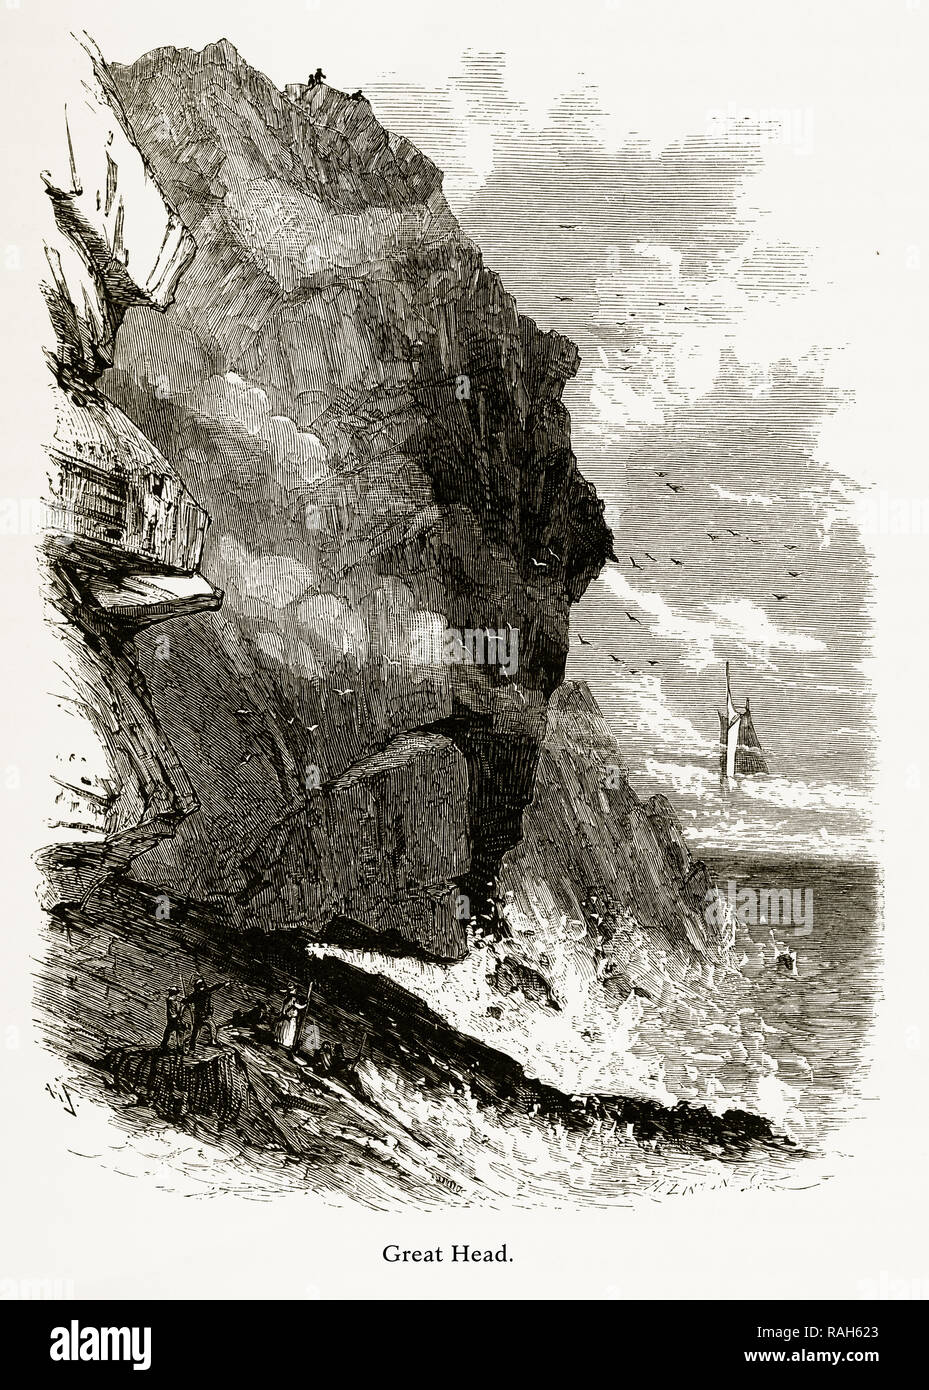 Great Head, Frenchman’s Bay, Maine, United States, American Victorian Engraving, 1872 Stock Photo